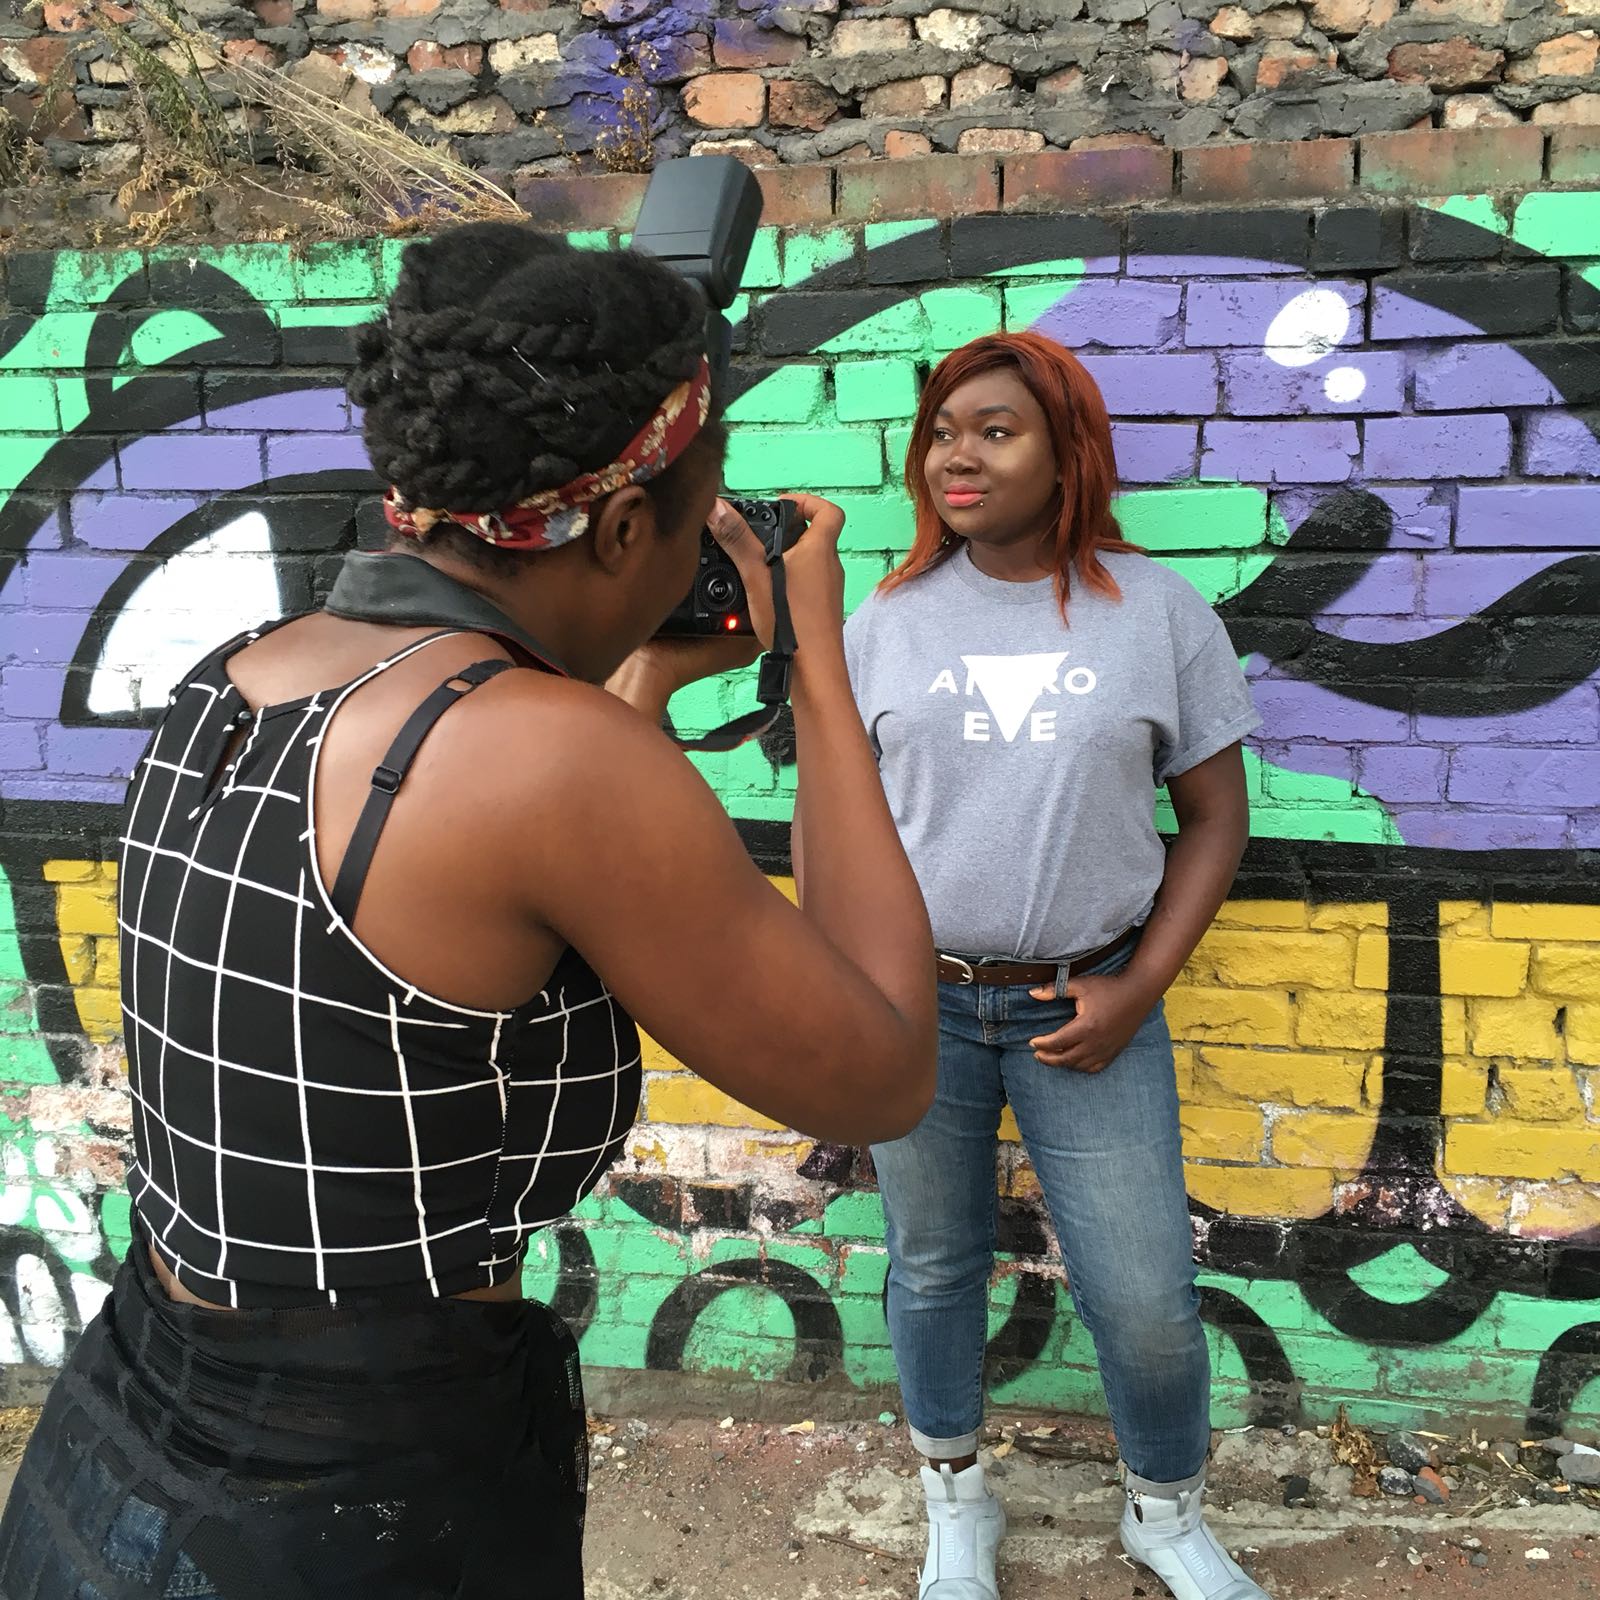 A Black, female photographer takes a picture of a Black, femme lesbian wwearing and Andro and Eve logo T Shirt